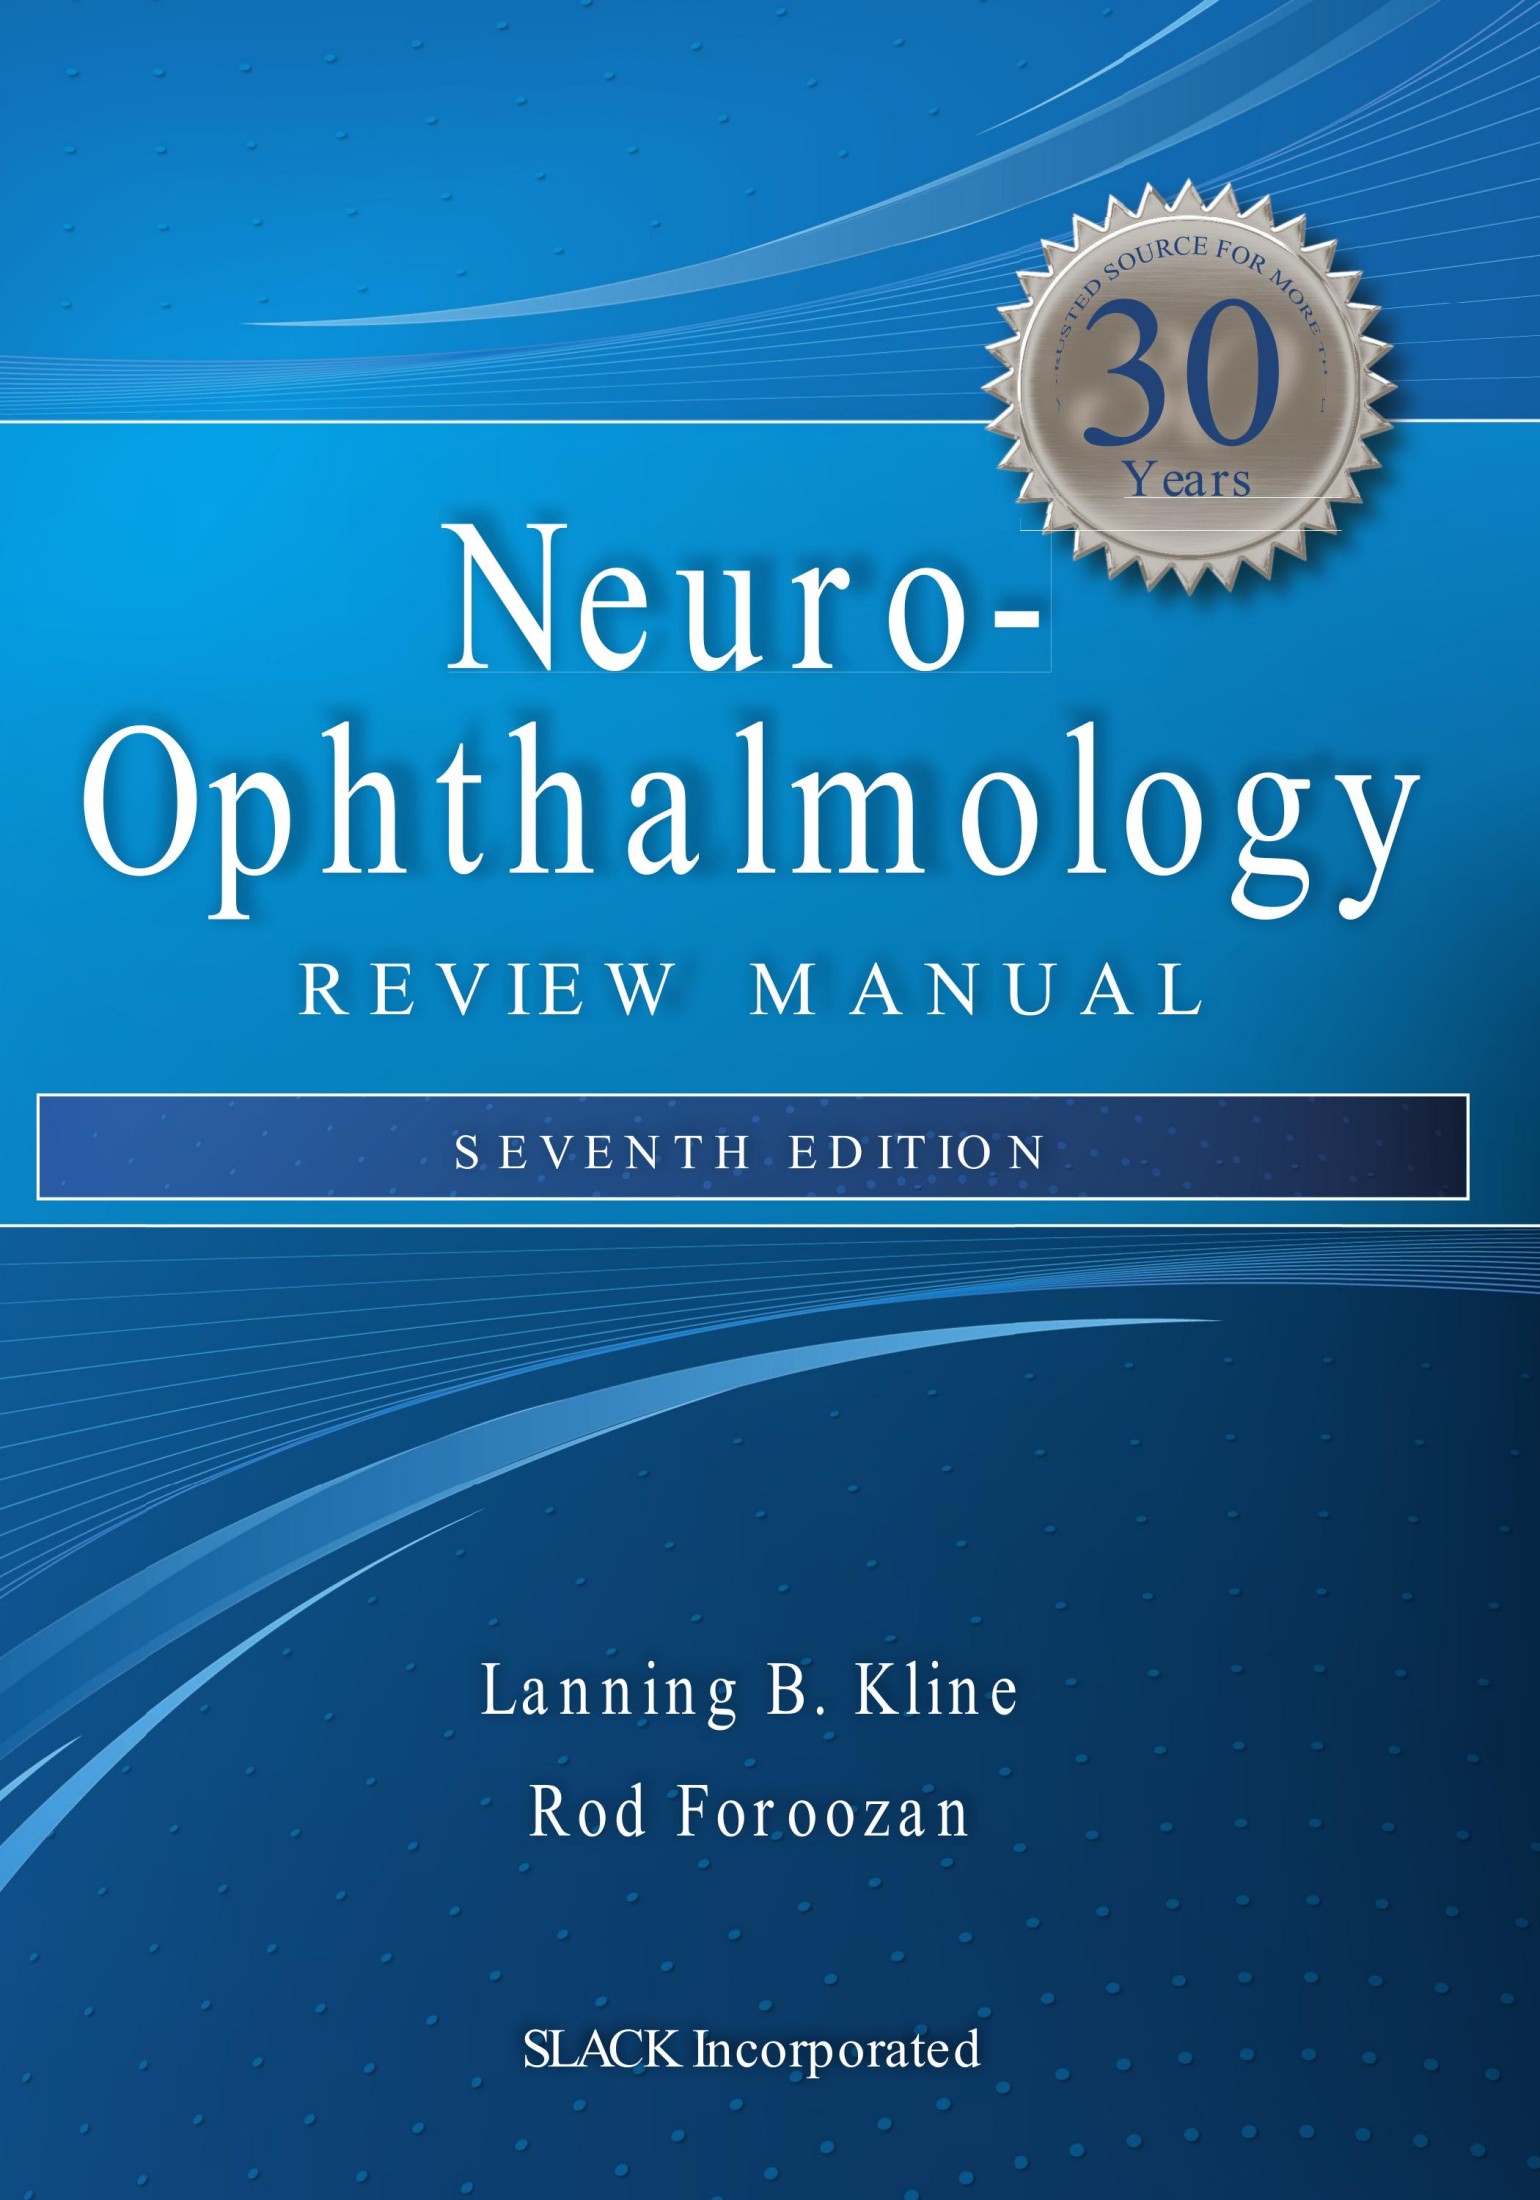 Neuro-Ophthalmology Review Manual 7th ed 2013